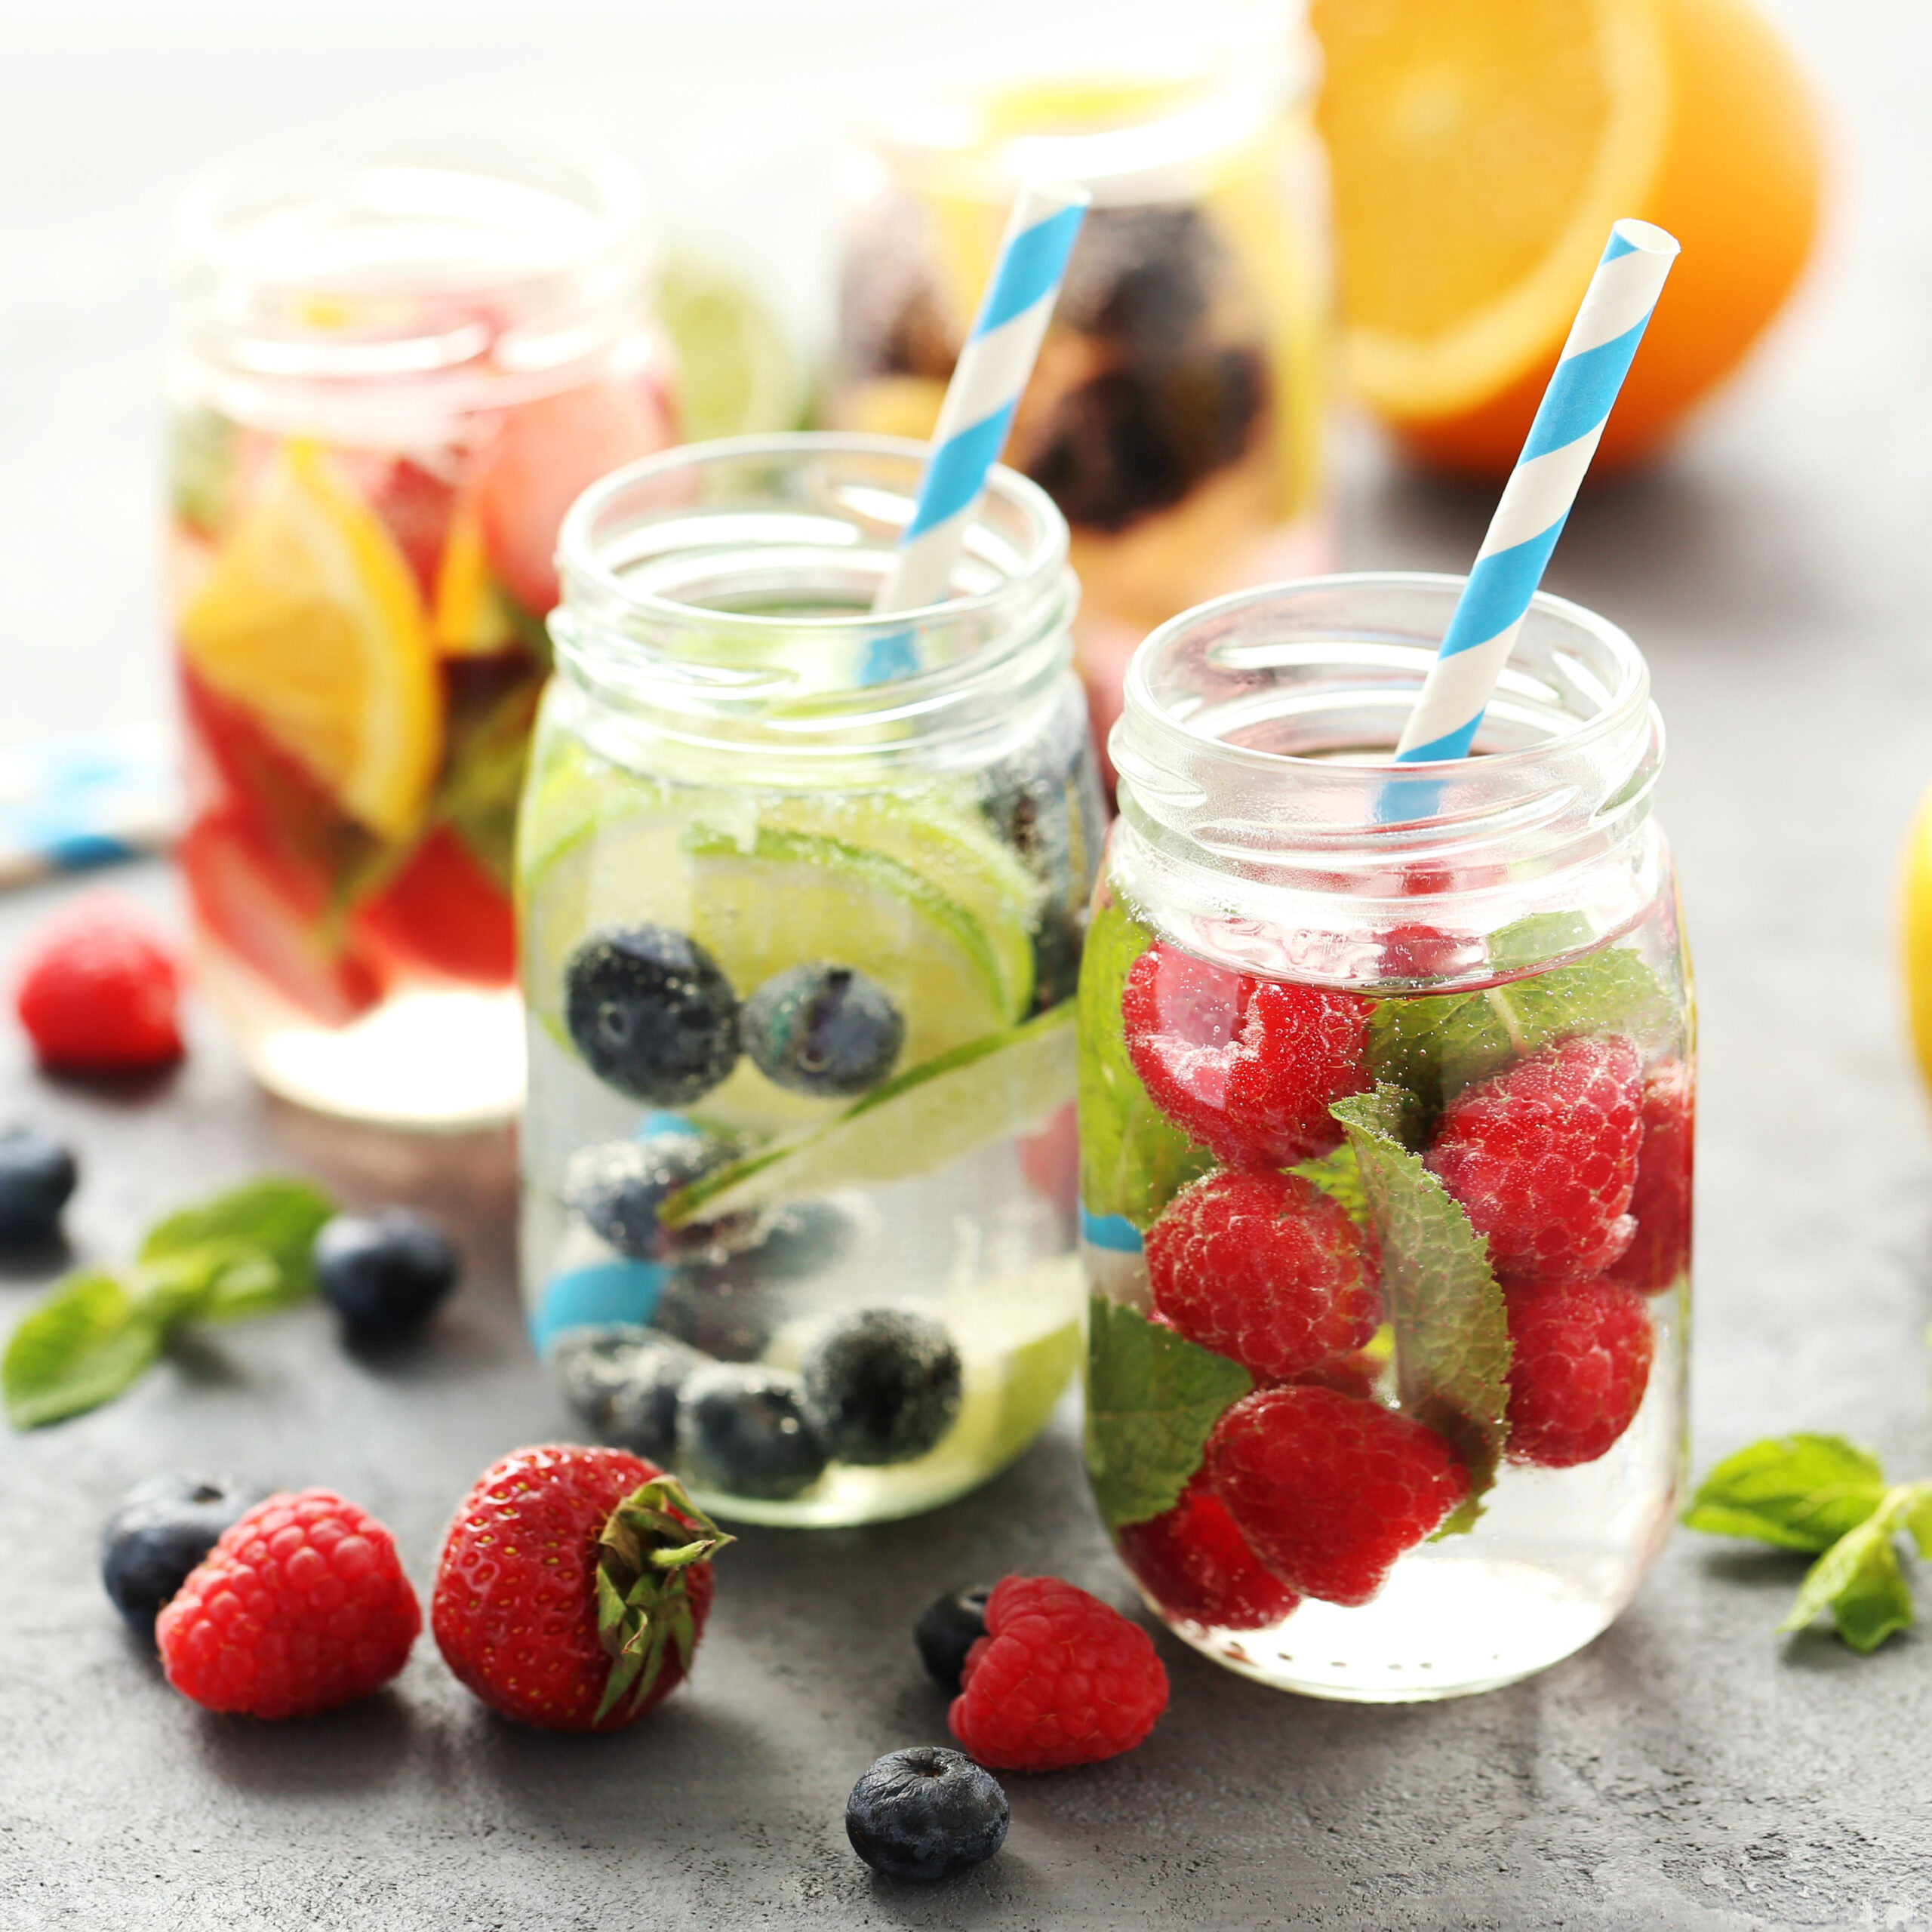 fruit-infused water